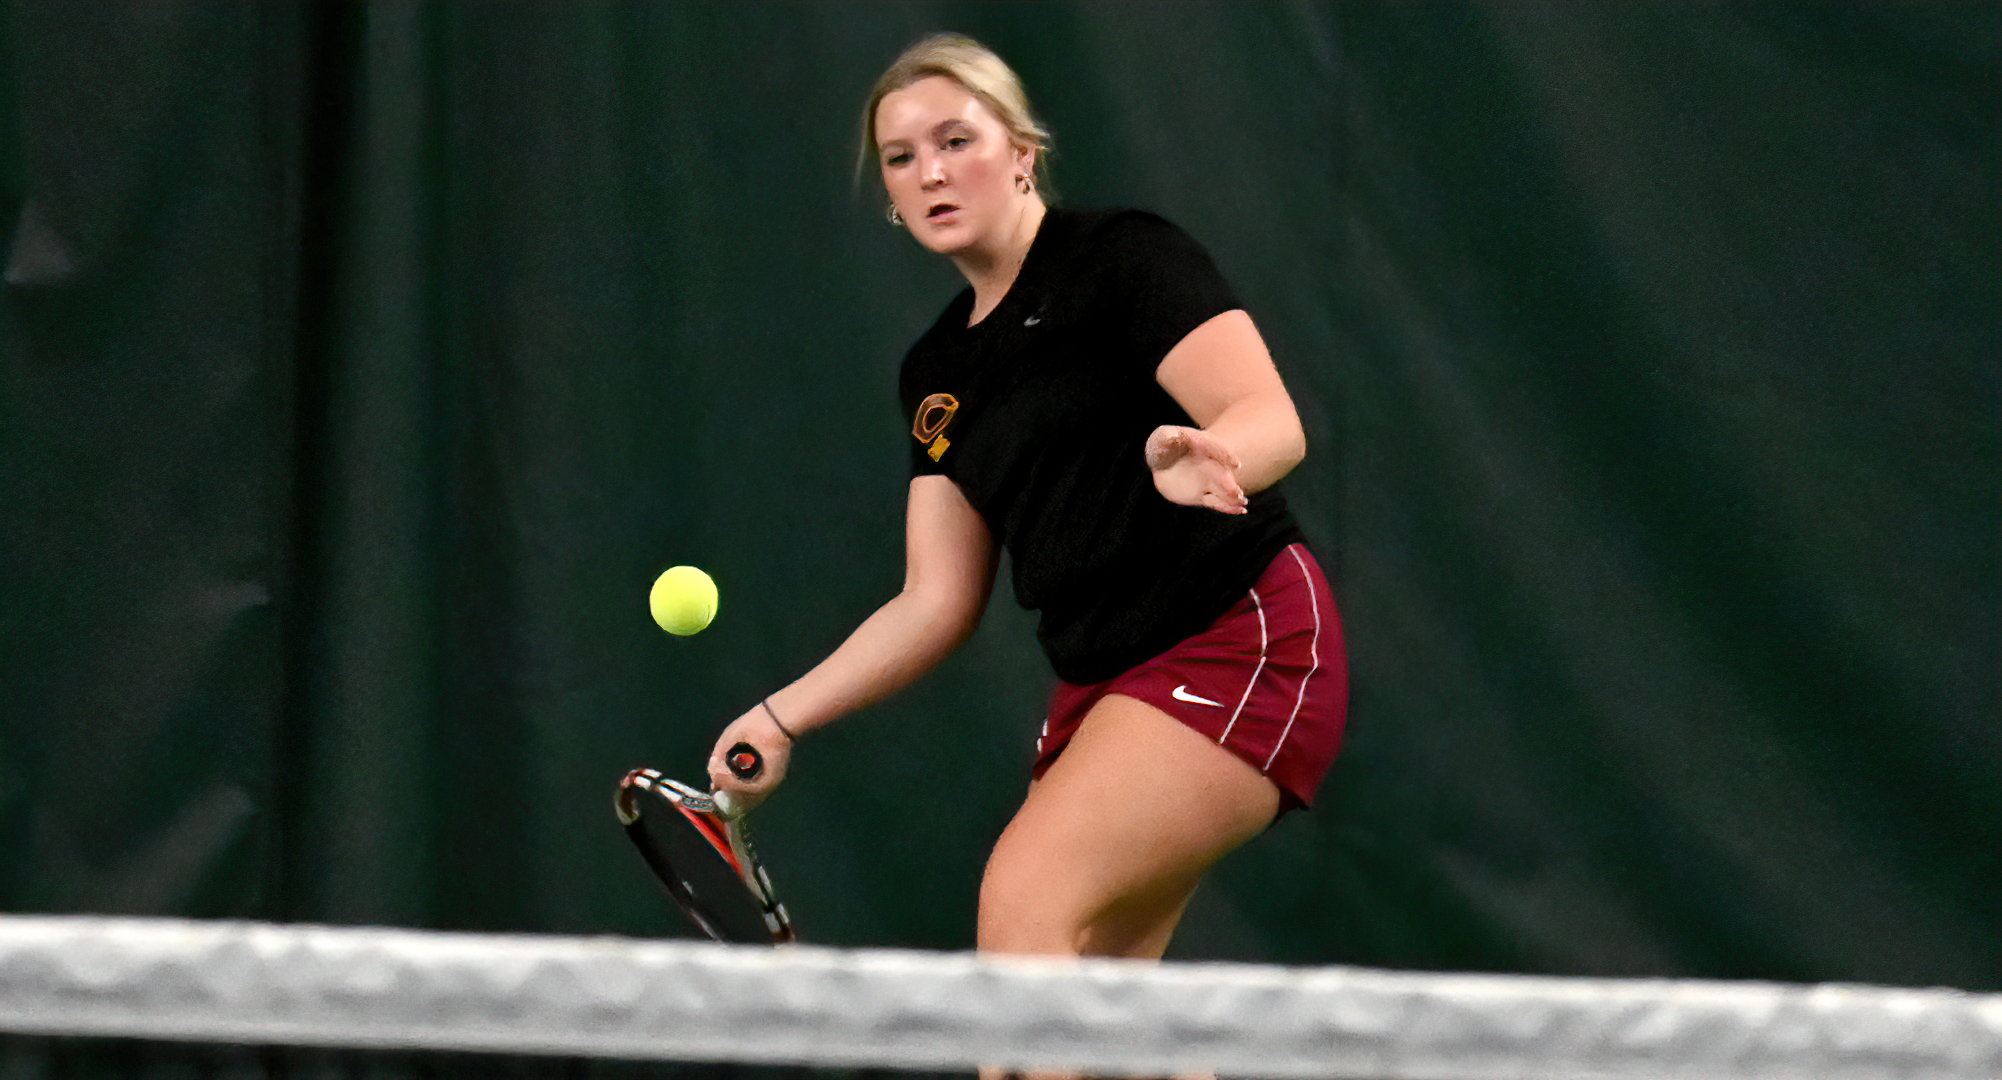 First-year Cobber Bell Hamre battled into extra points in the super-set tie-breaker in her match at No.6 singles in CC's dual with Minn.-Crookston